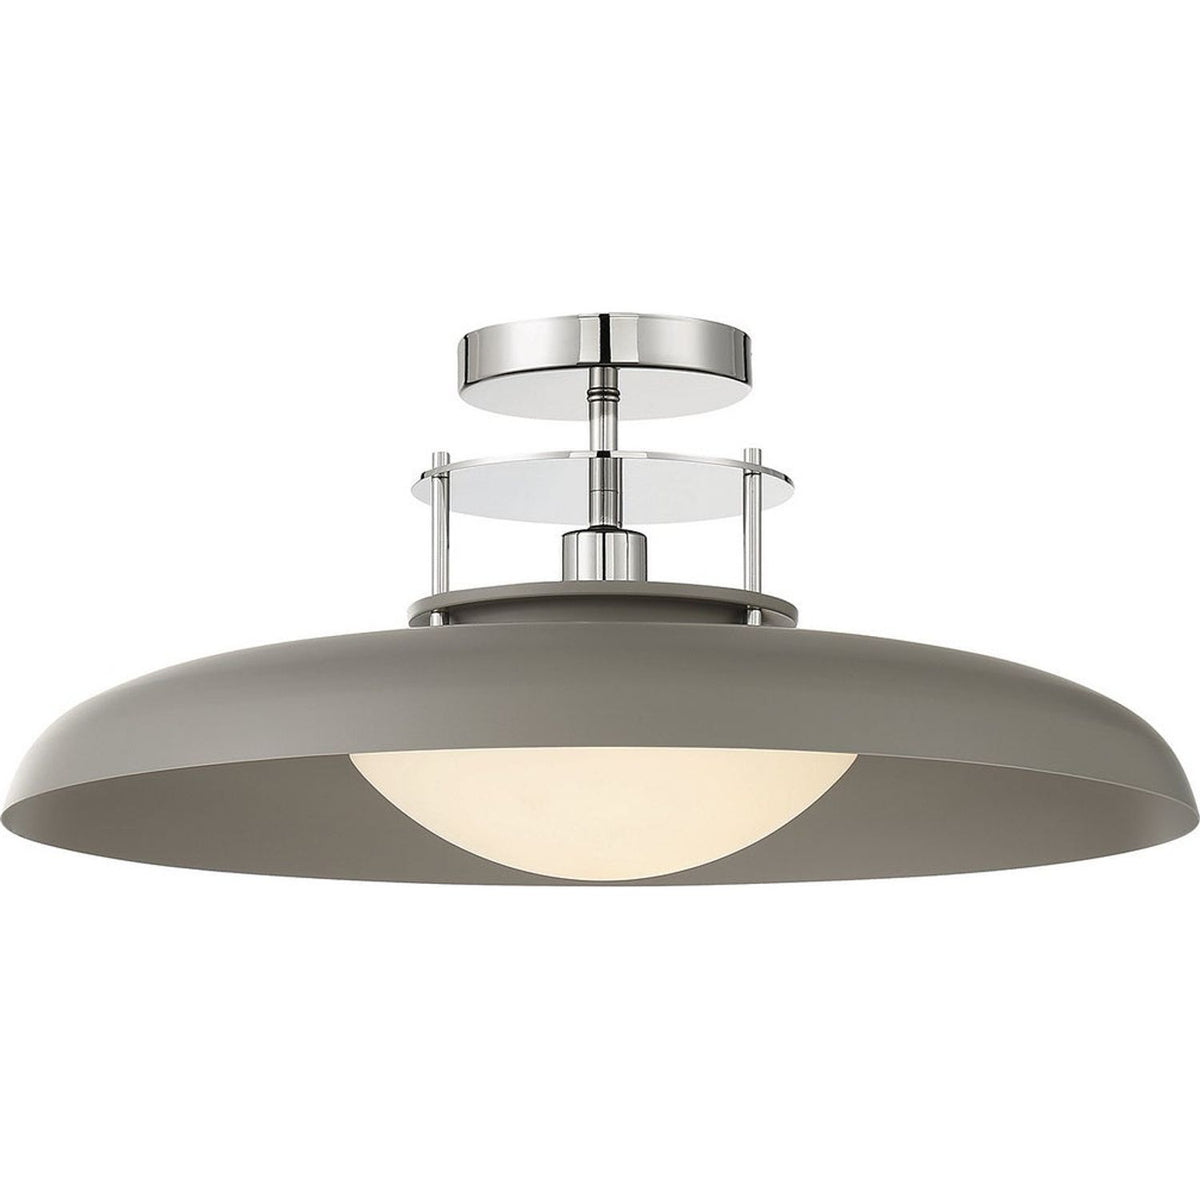 Savoy House - 6-1685-1-175 - One Light Semi-Flush Mount - Gavin - Gray with Polished Nickel Accents